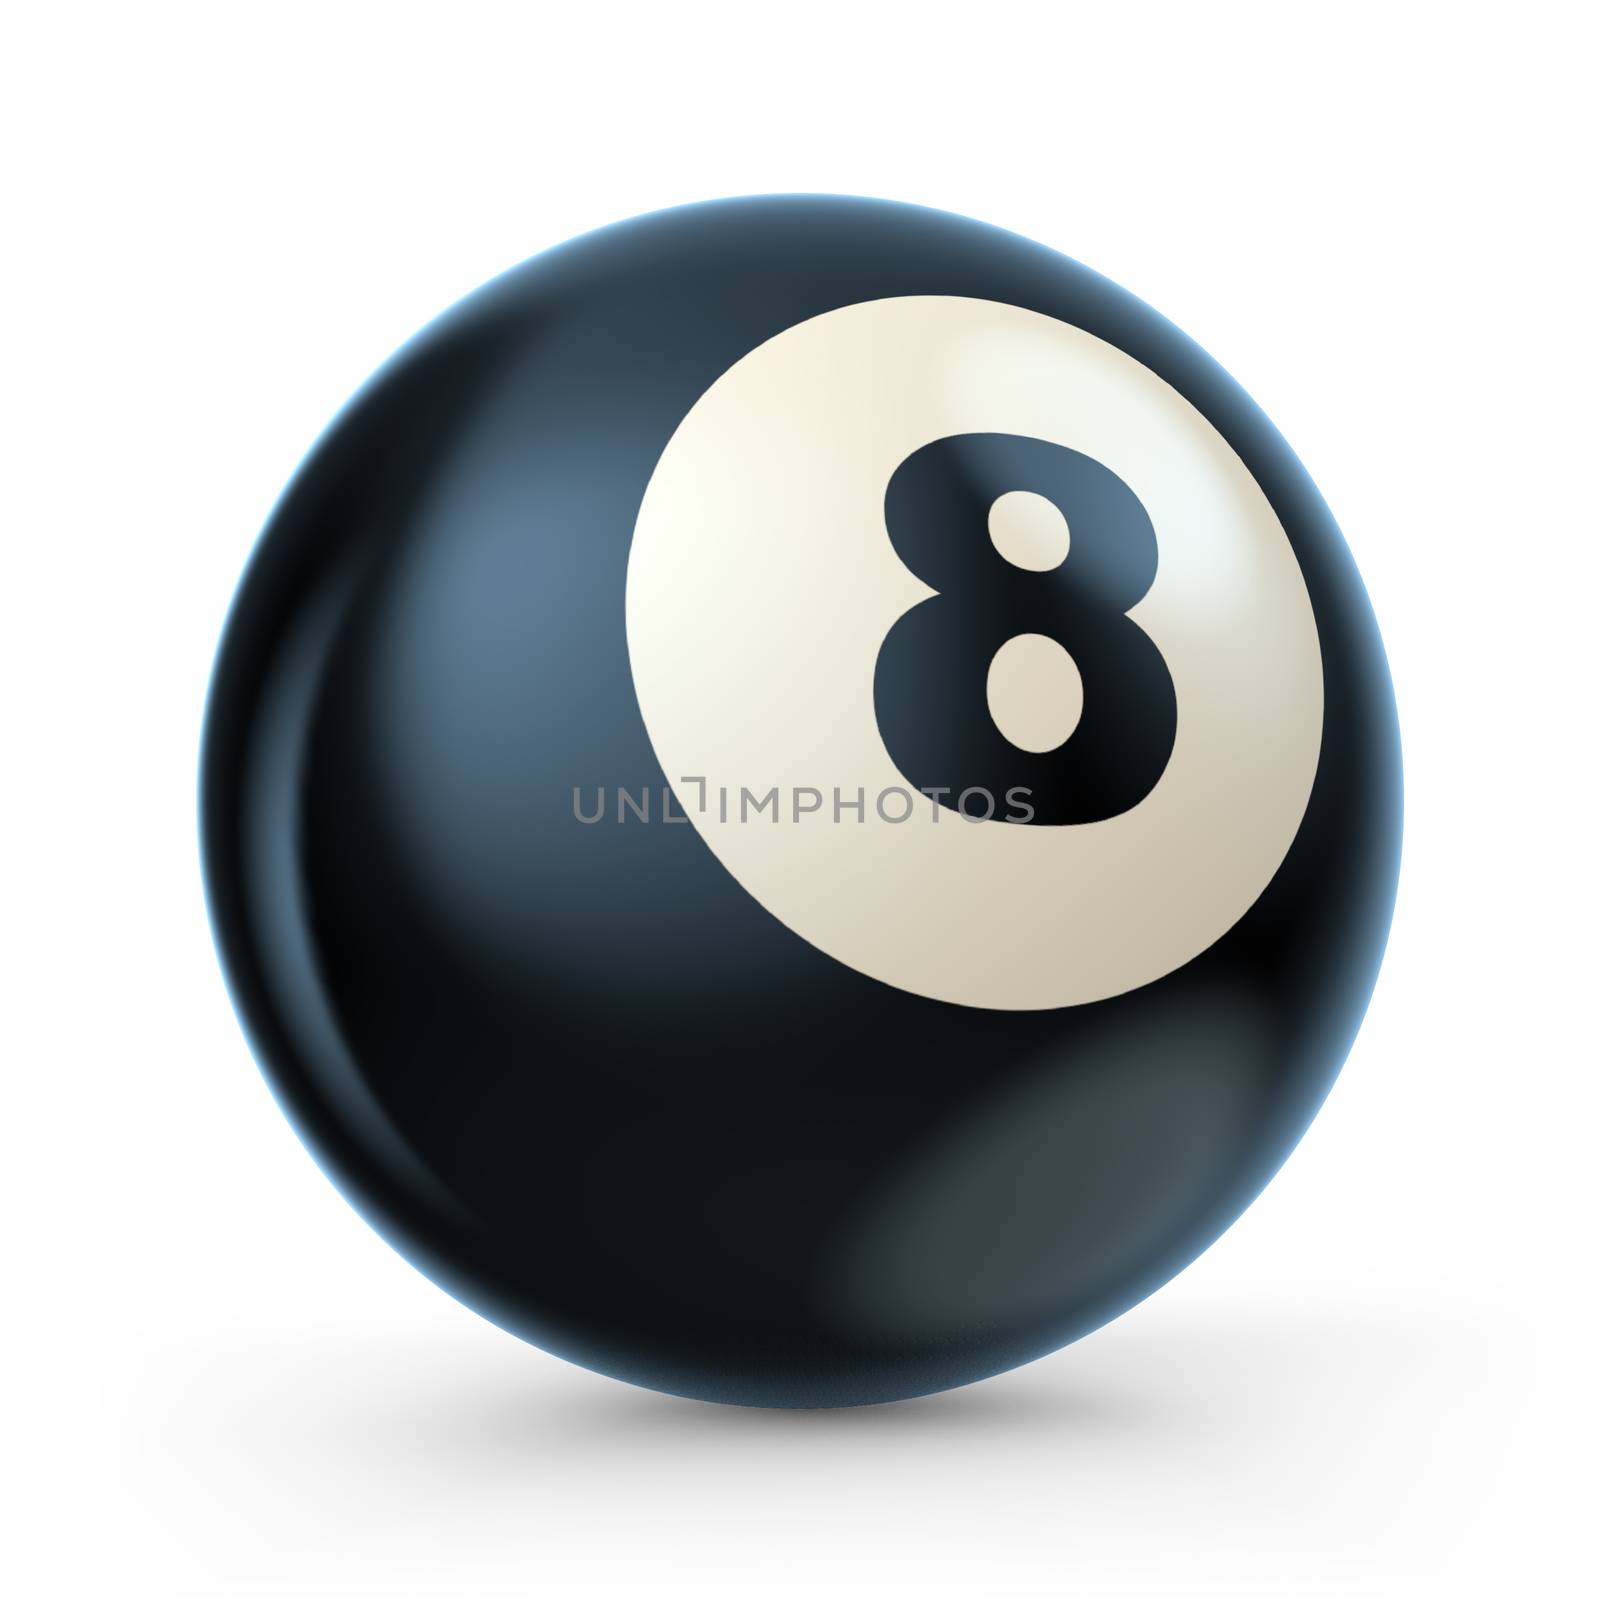 Black pool game ball with number 8. 3D illustration isolated on white background